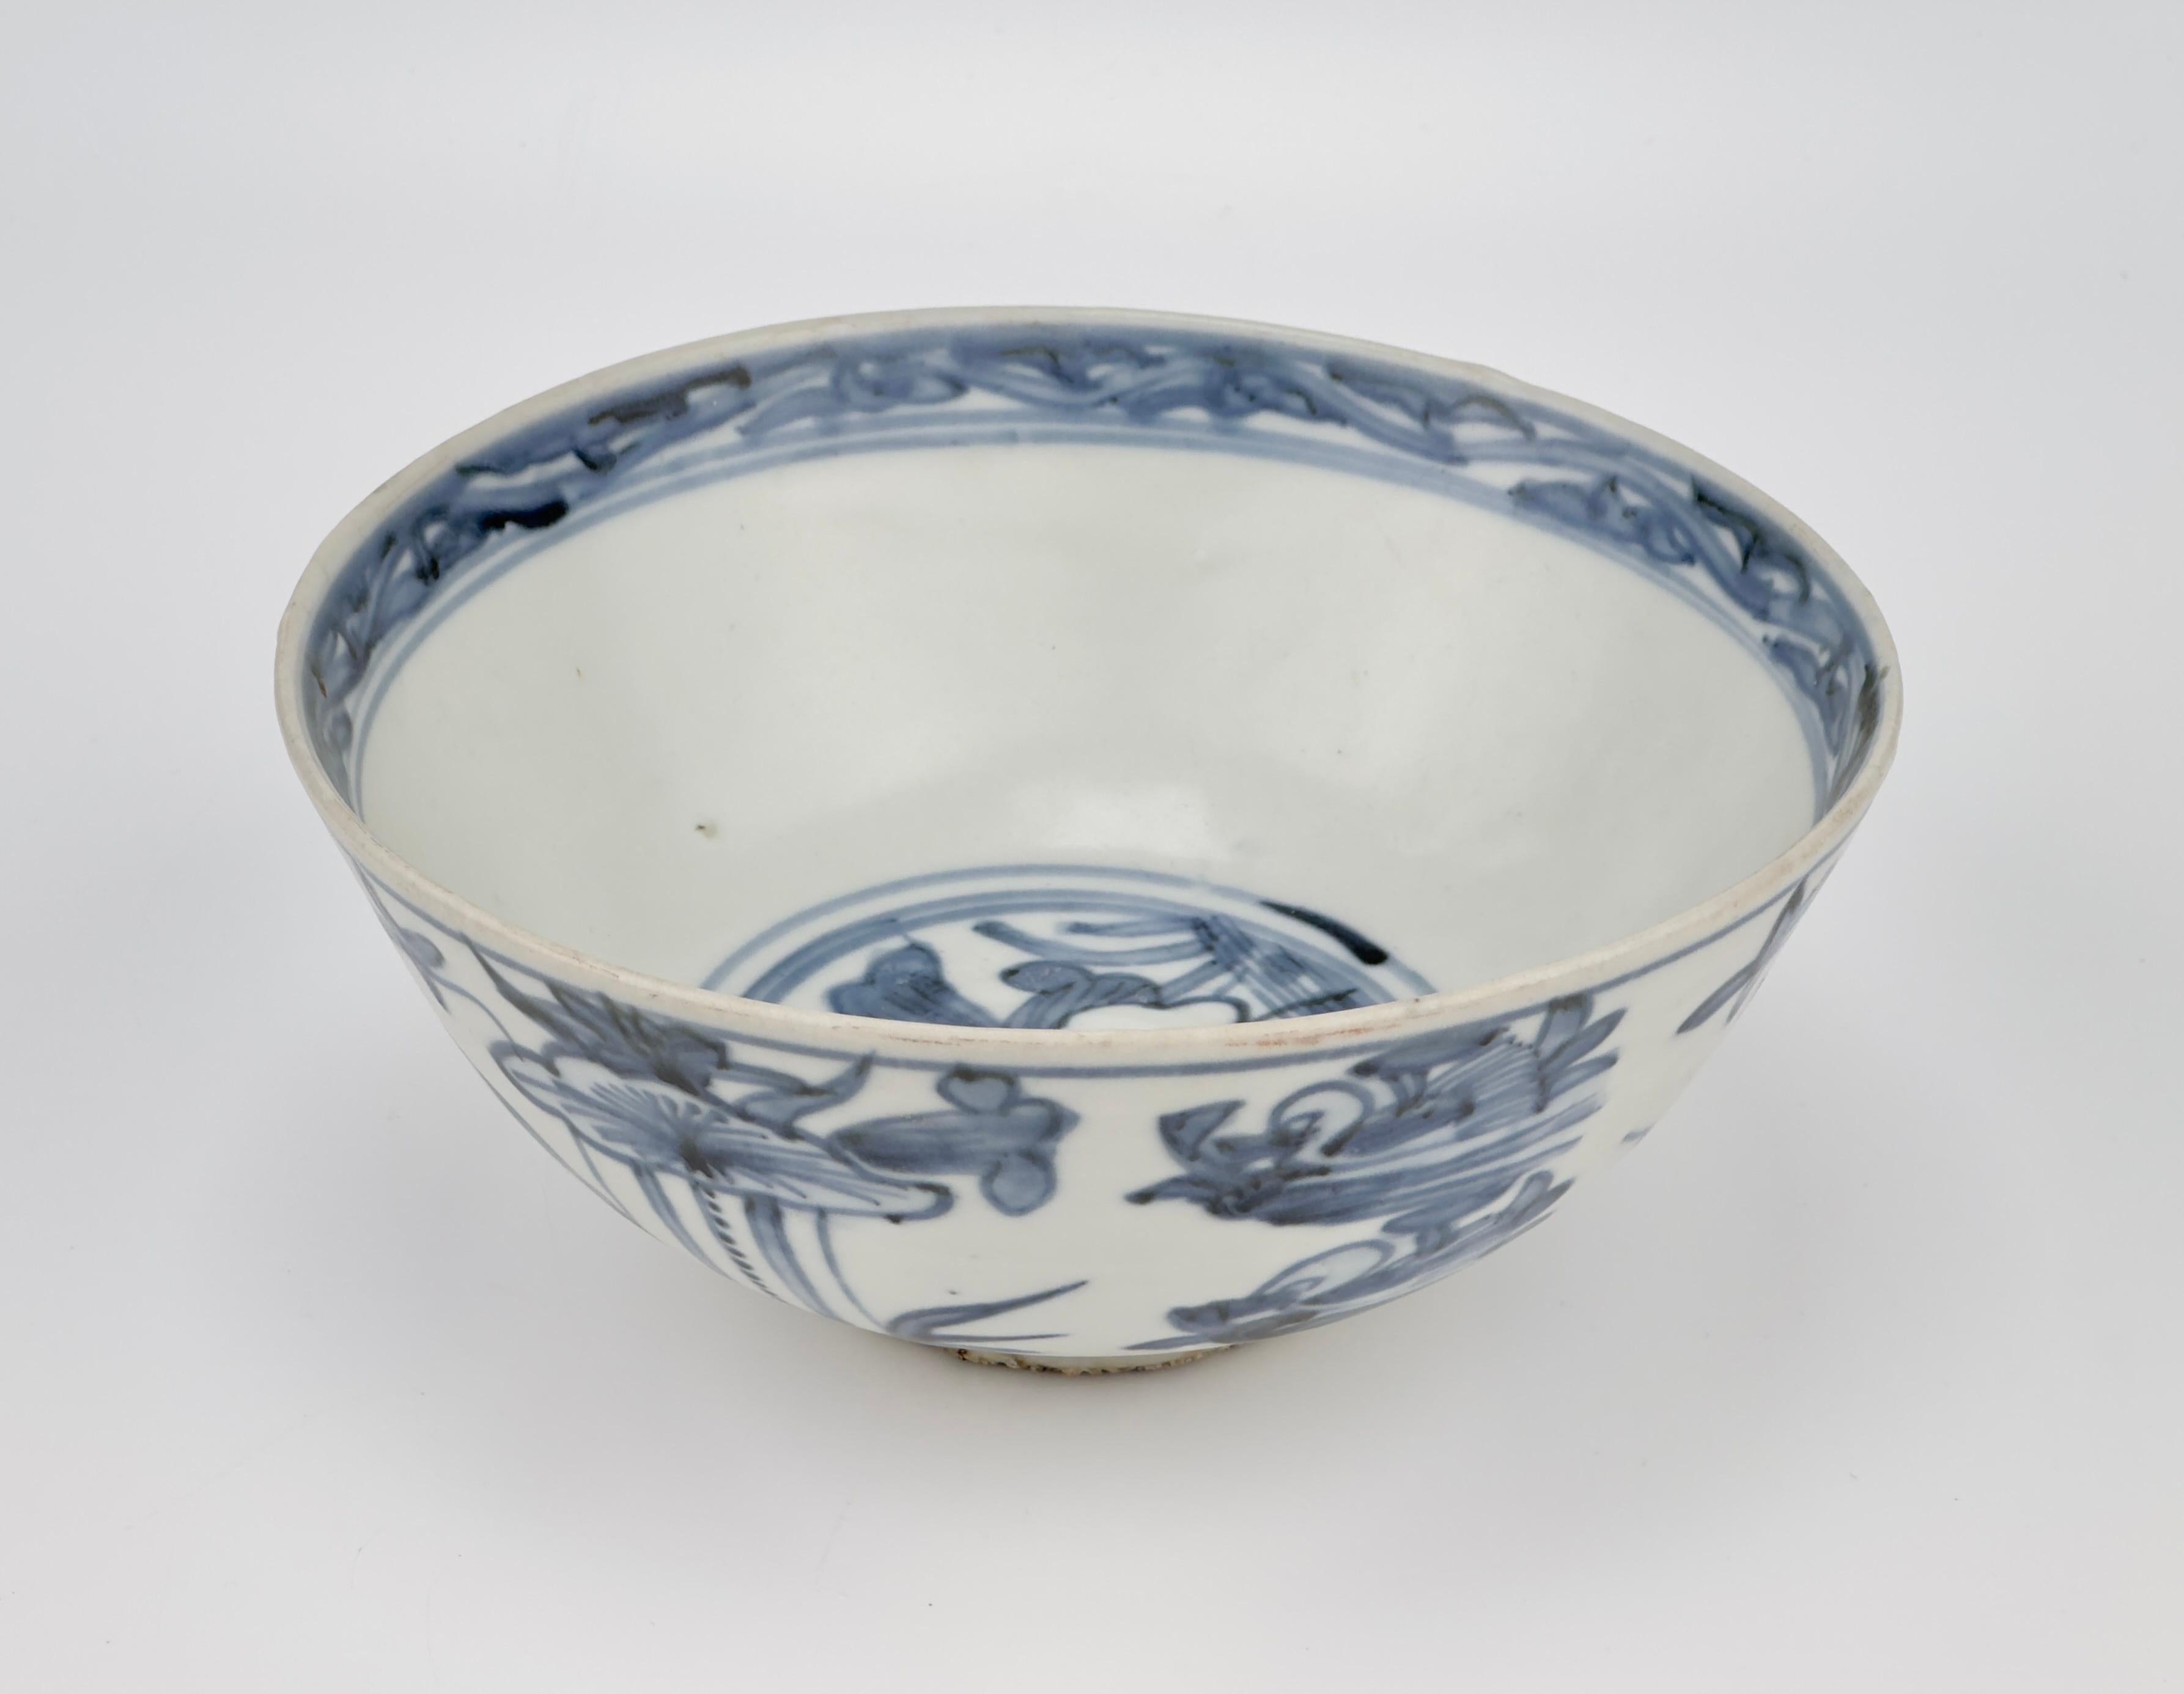 Glazed Bowl with mandarin duck and lotus pattern design, Late Ming Era(16-17th century) For Sale